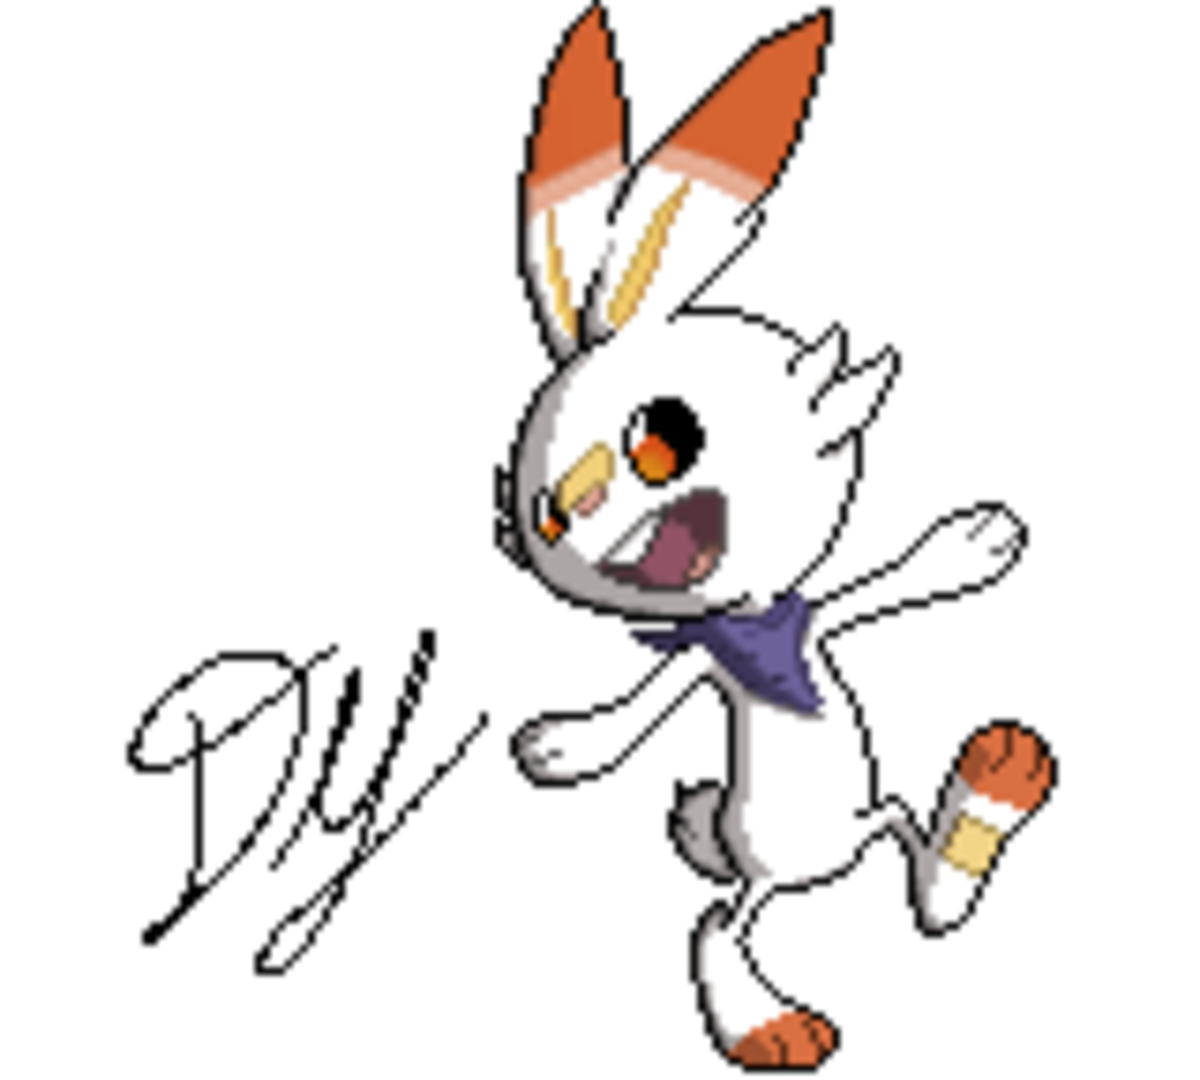 Pixelart Scorbunny. Picking up pixel art a bit to see how it goes, drew over an older drawing i did last year to practice join list: DaringDoodles (51 subs)Ment